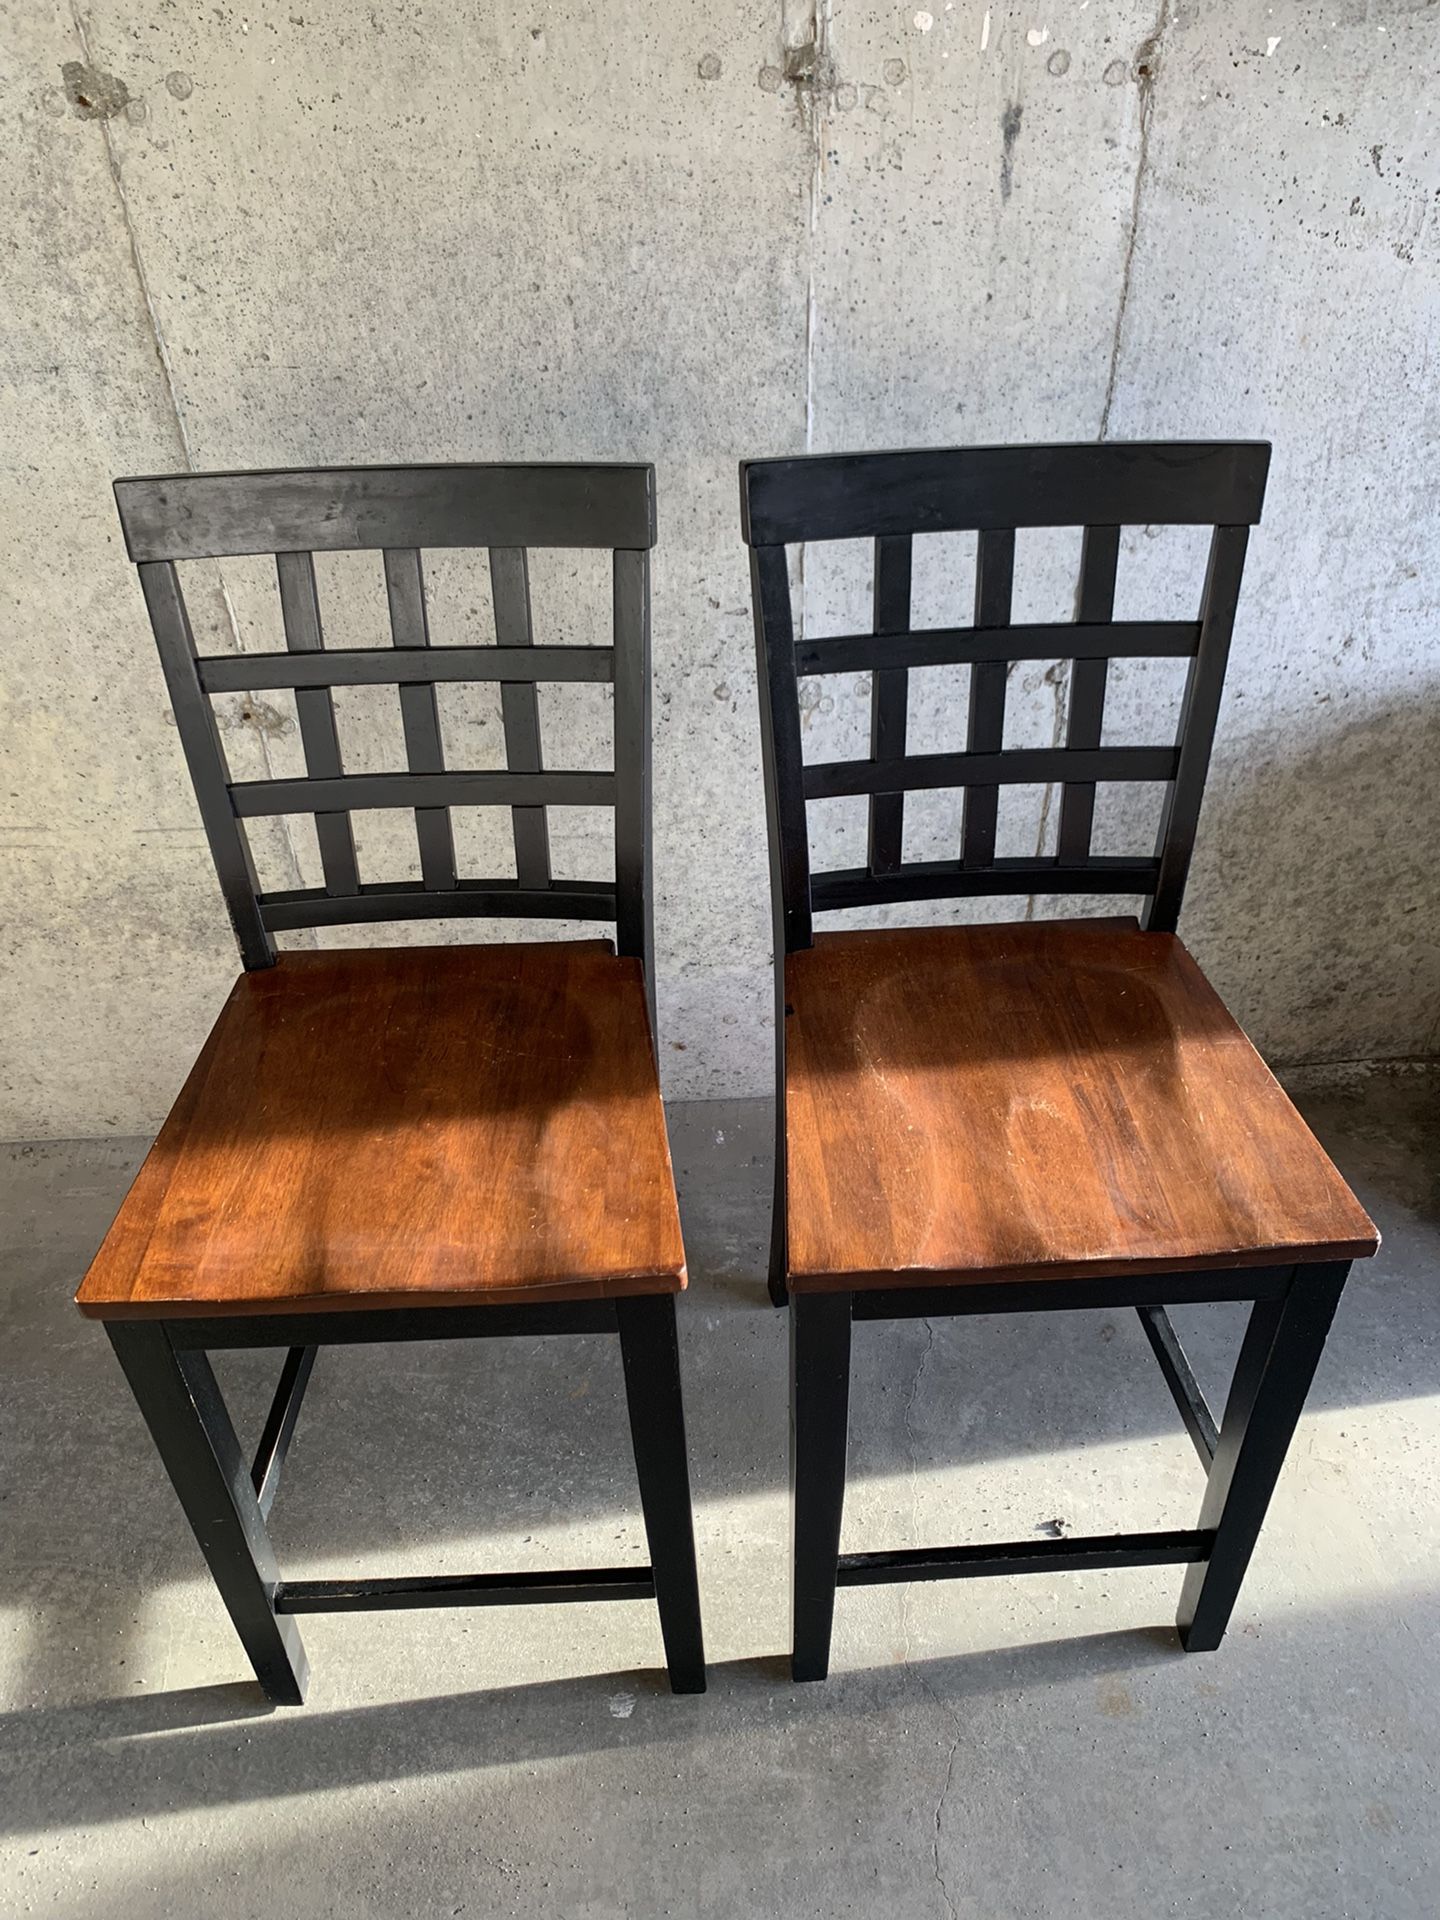 Black & Brown Wood Bar Stools 2count Set 3ft. 5in. Tall